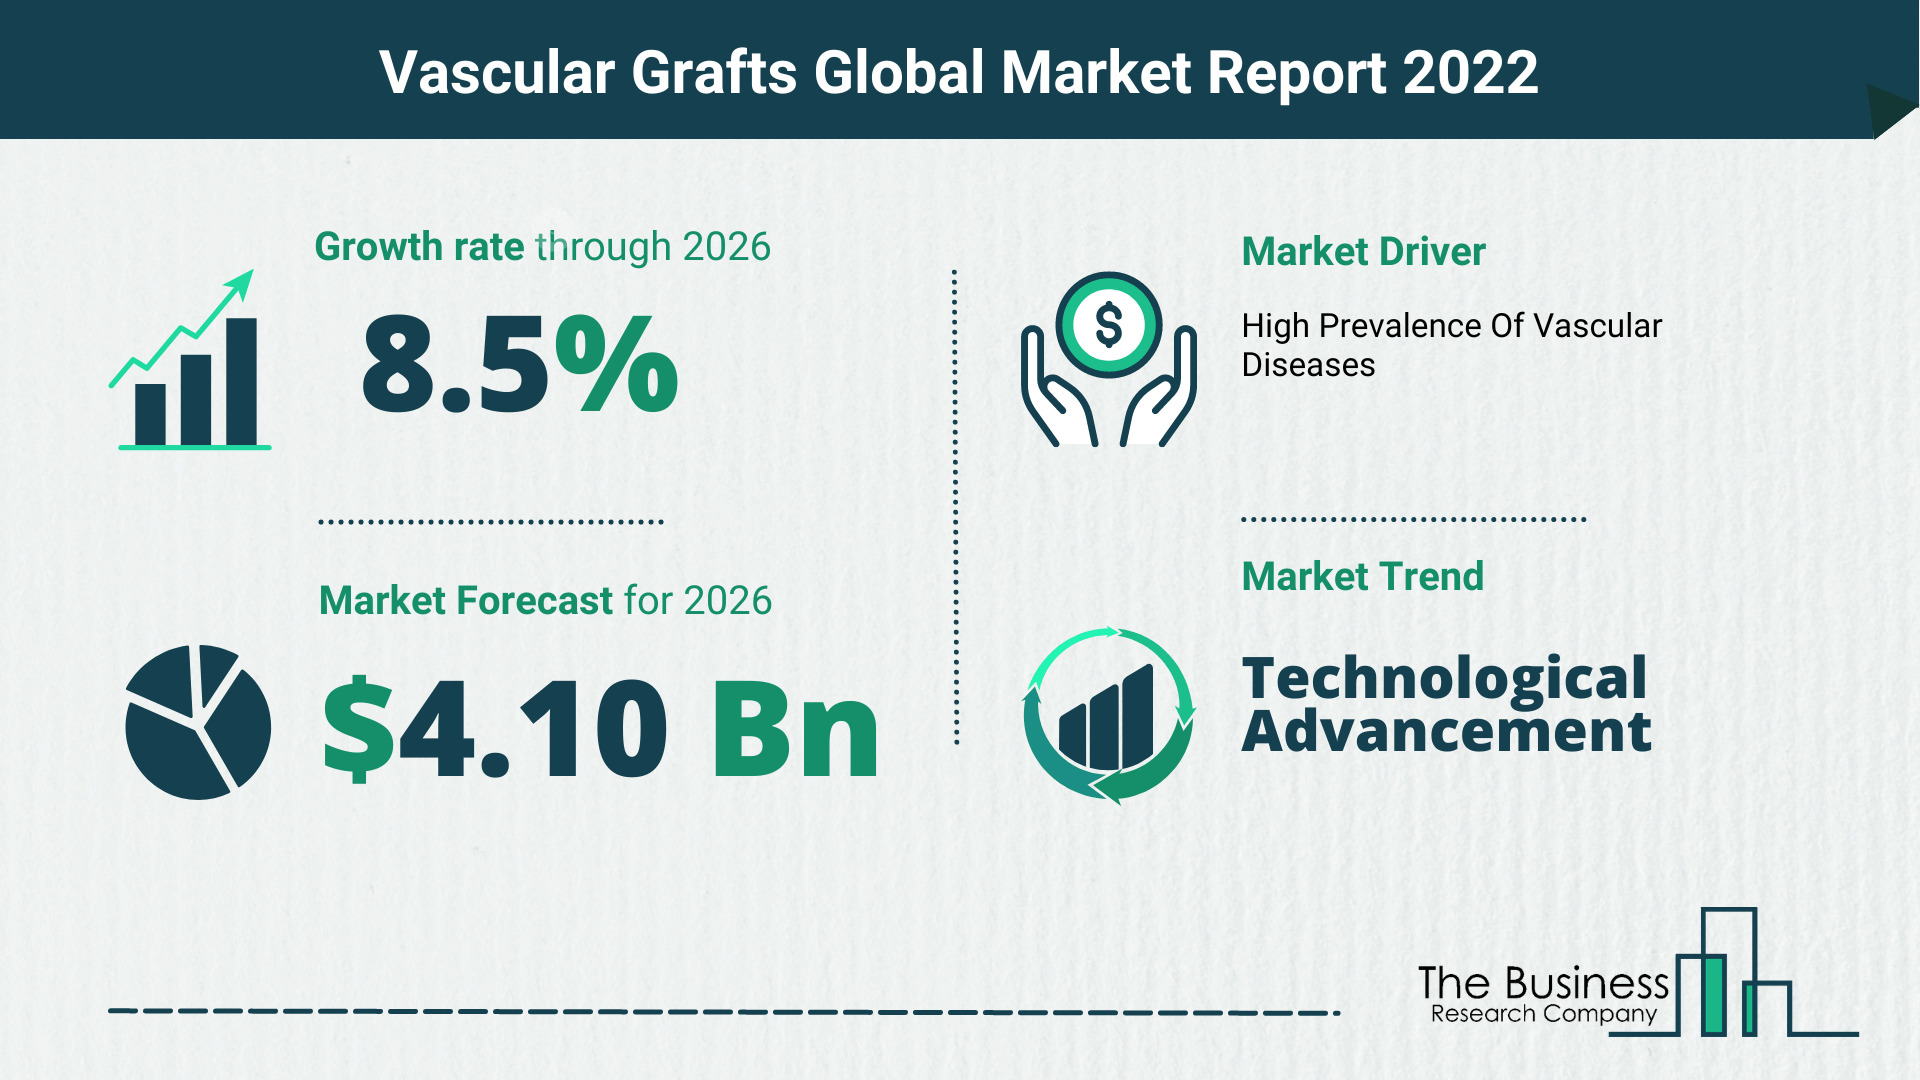 How Will The Vascular Grafts Market Grow In 2022?